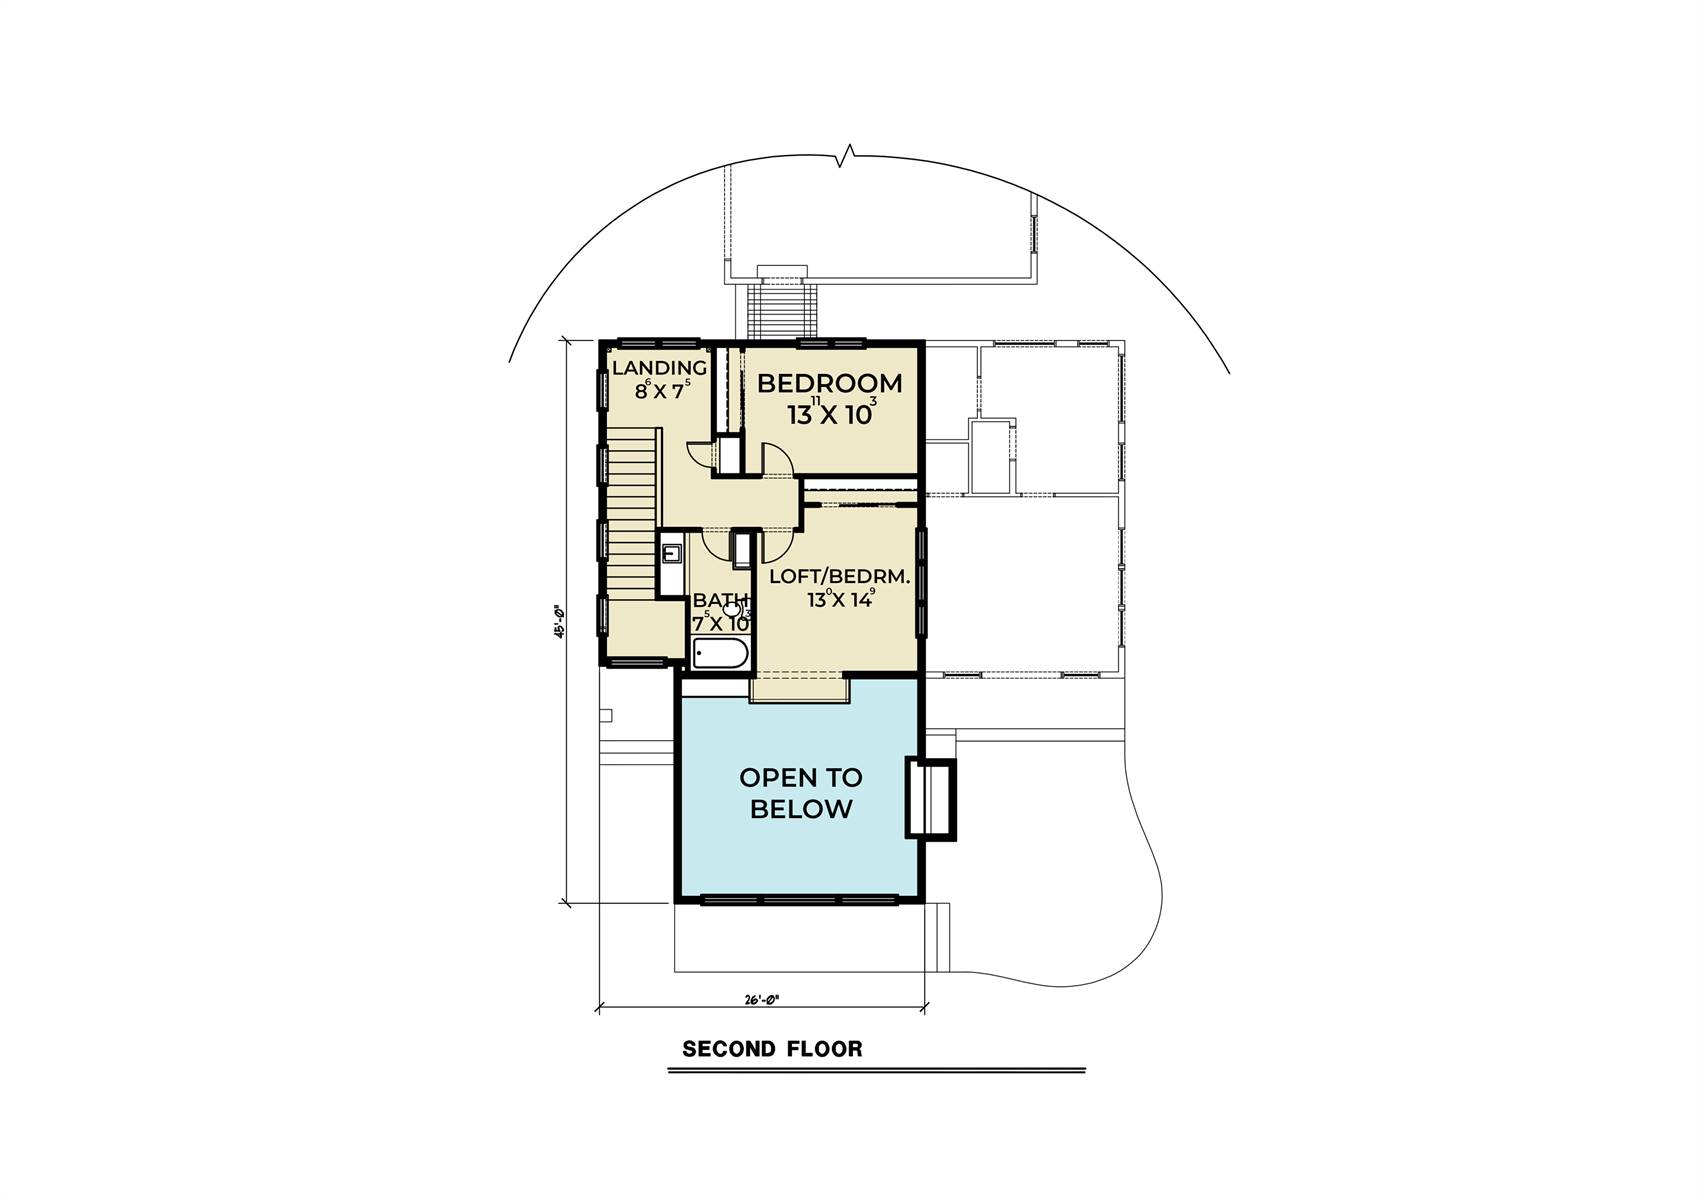 2nd Floor image of Contemporary 201 House Plan